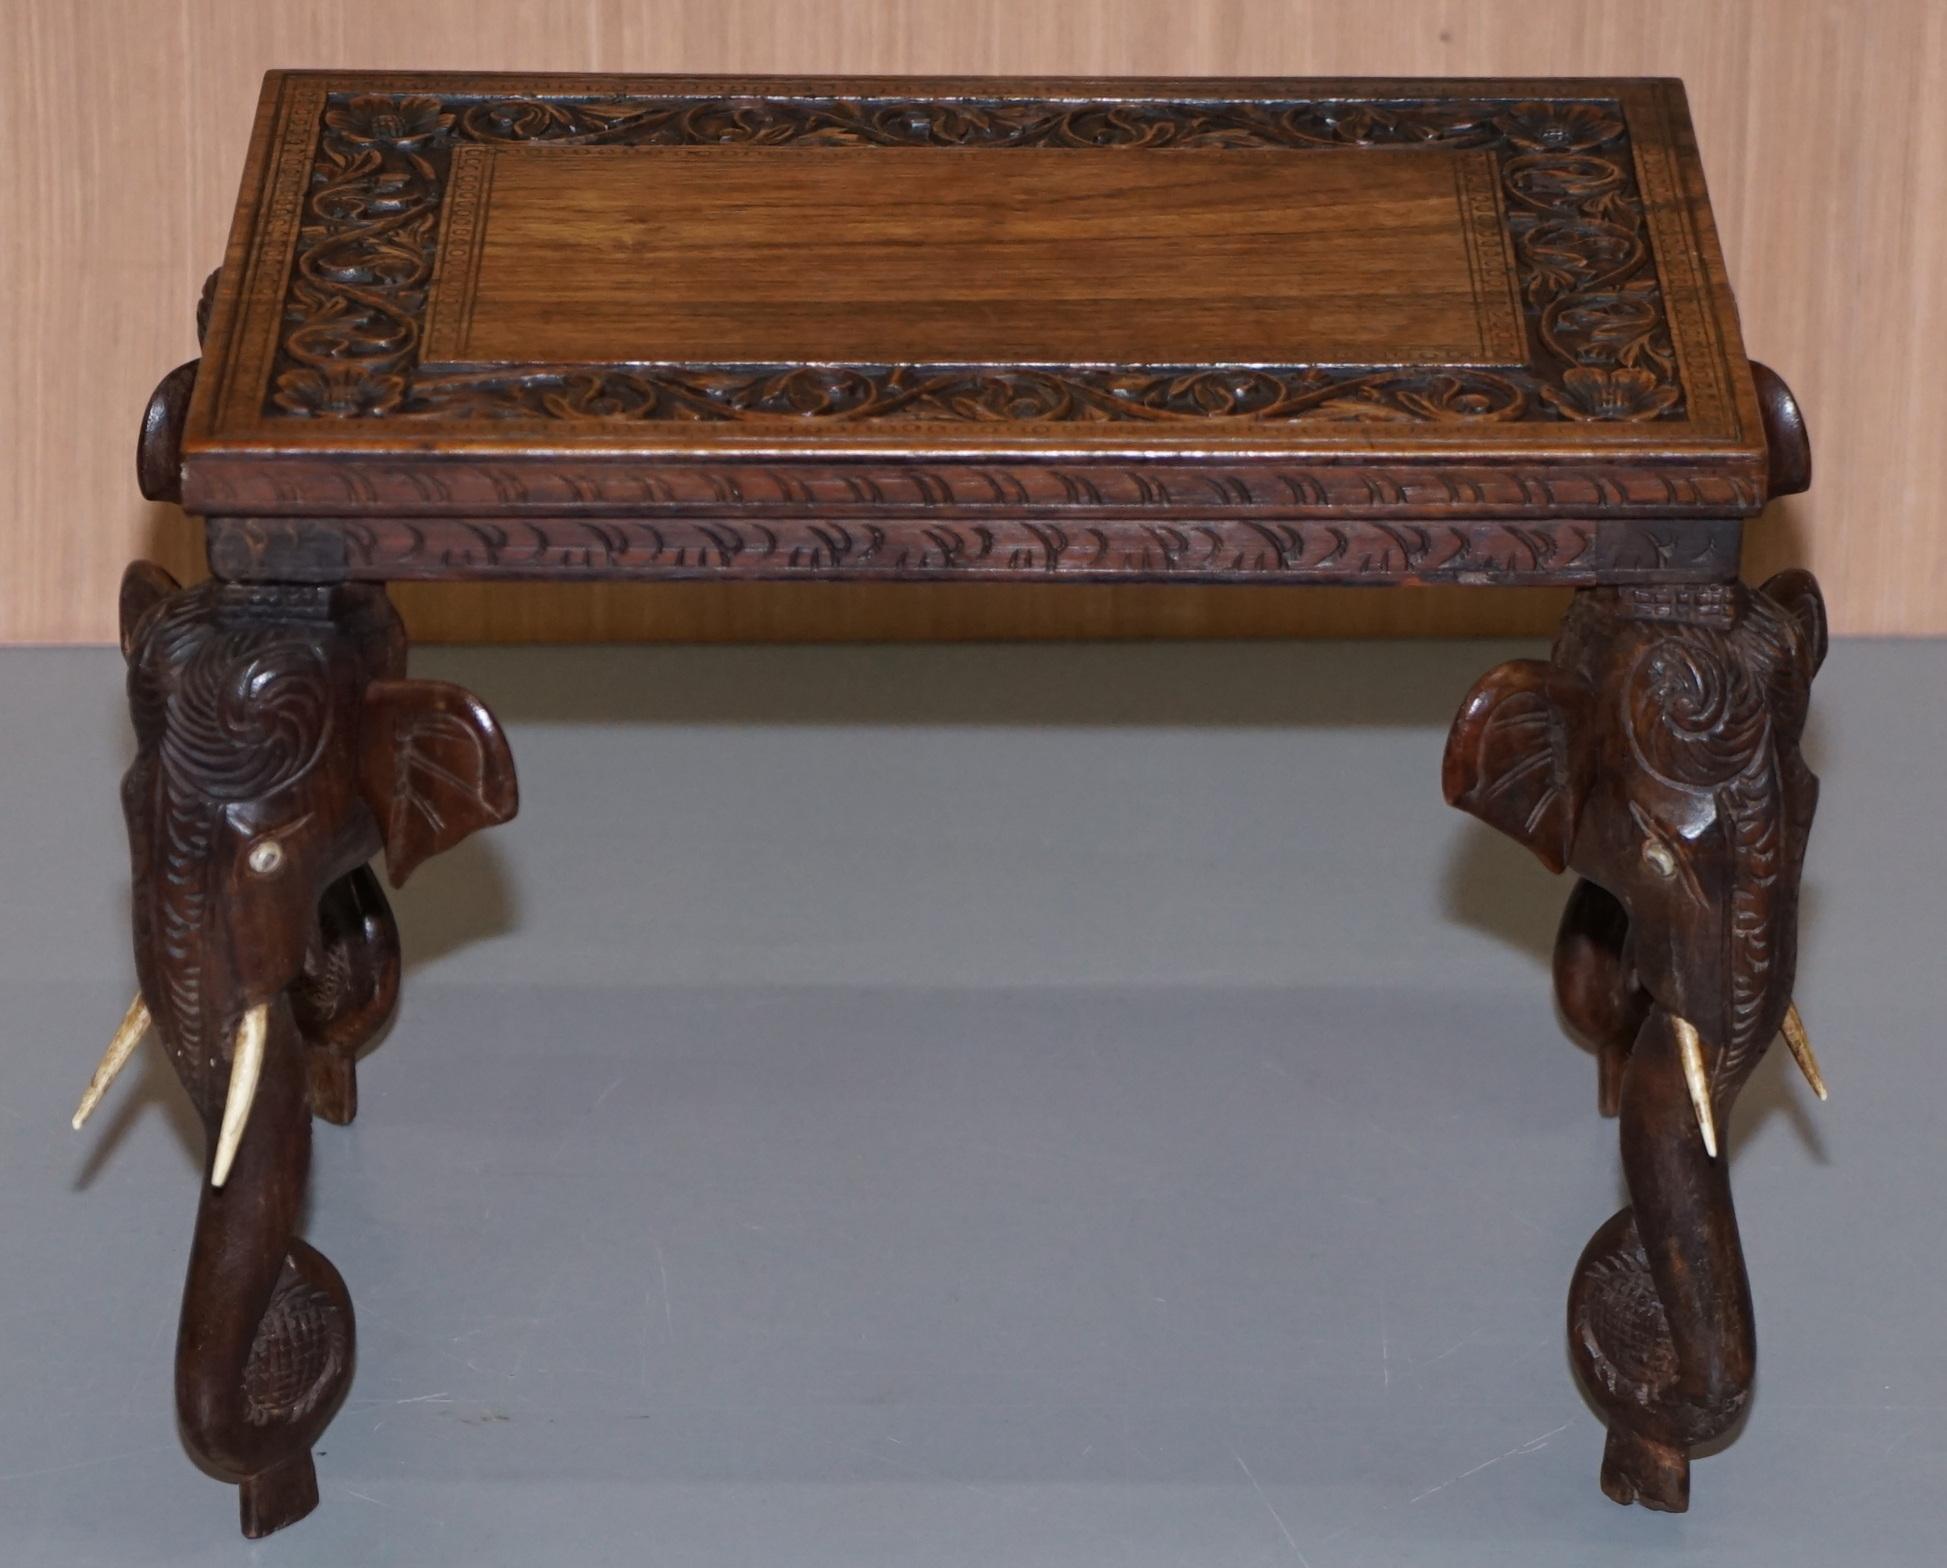 We are delighted to offer for sale this lovely circa 1880-1900 Anglo-Indian hand carved rosewood side table with Elephant pillared legs

A very decorative and well made piece, from the Anglo-Indian export era, you can’t really buy furniture like